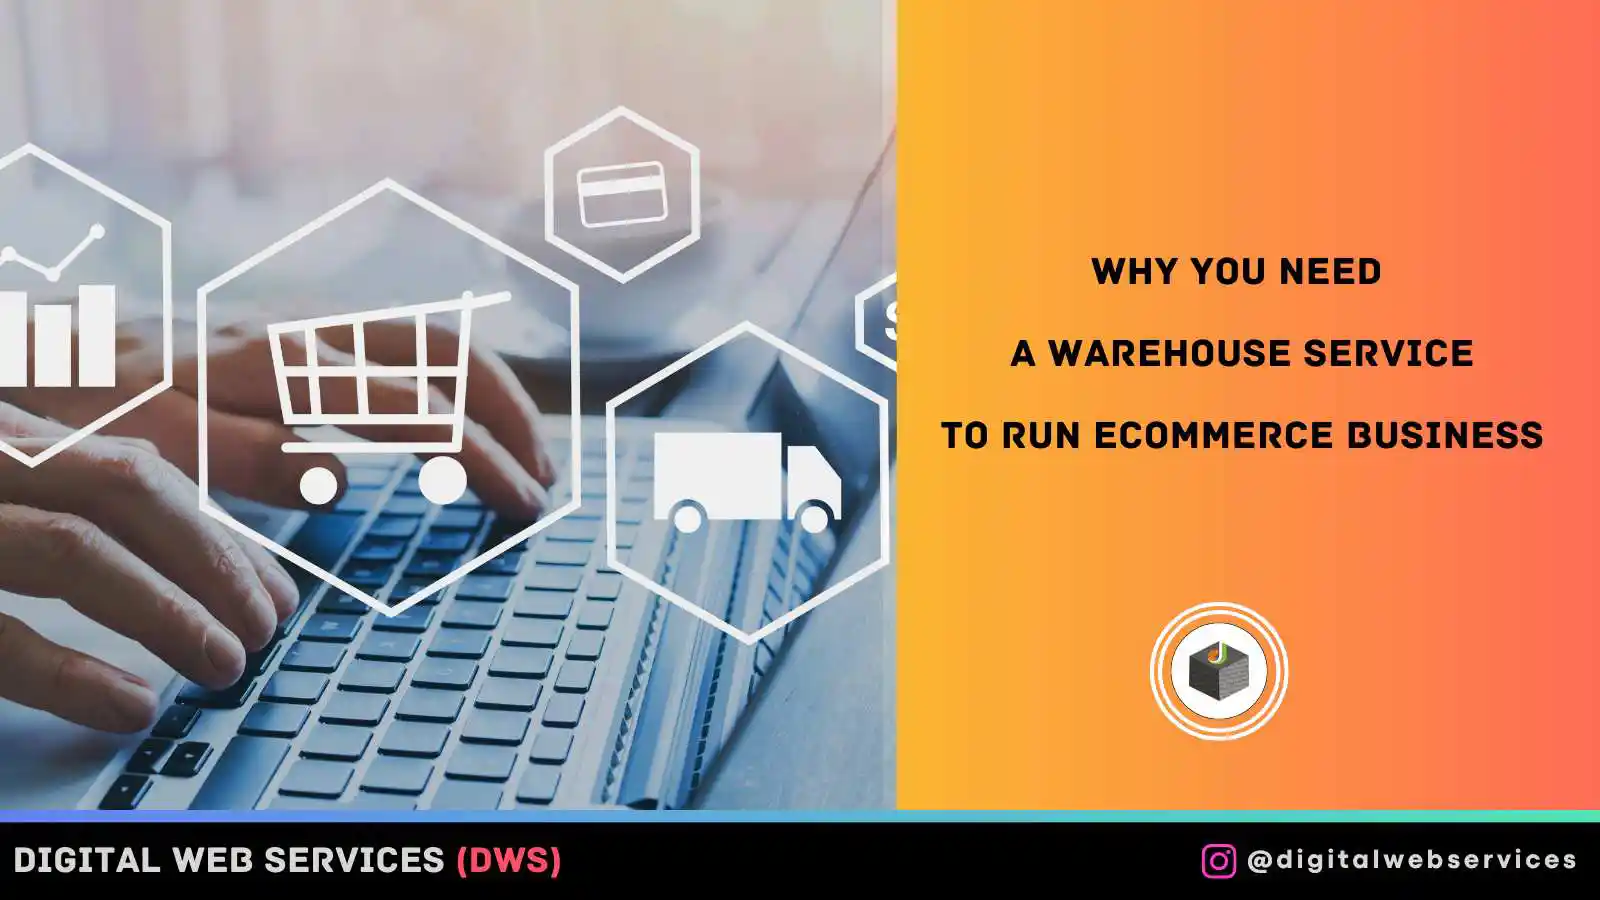 Why You Need A Warehouse Service to Run Ecommerce Business